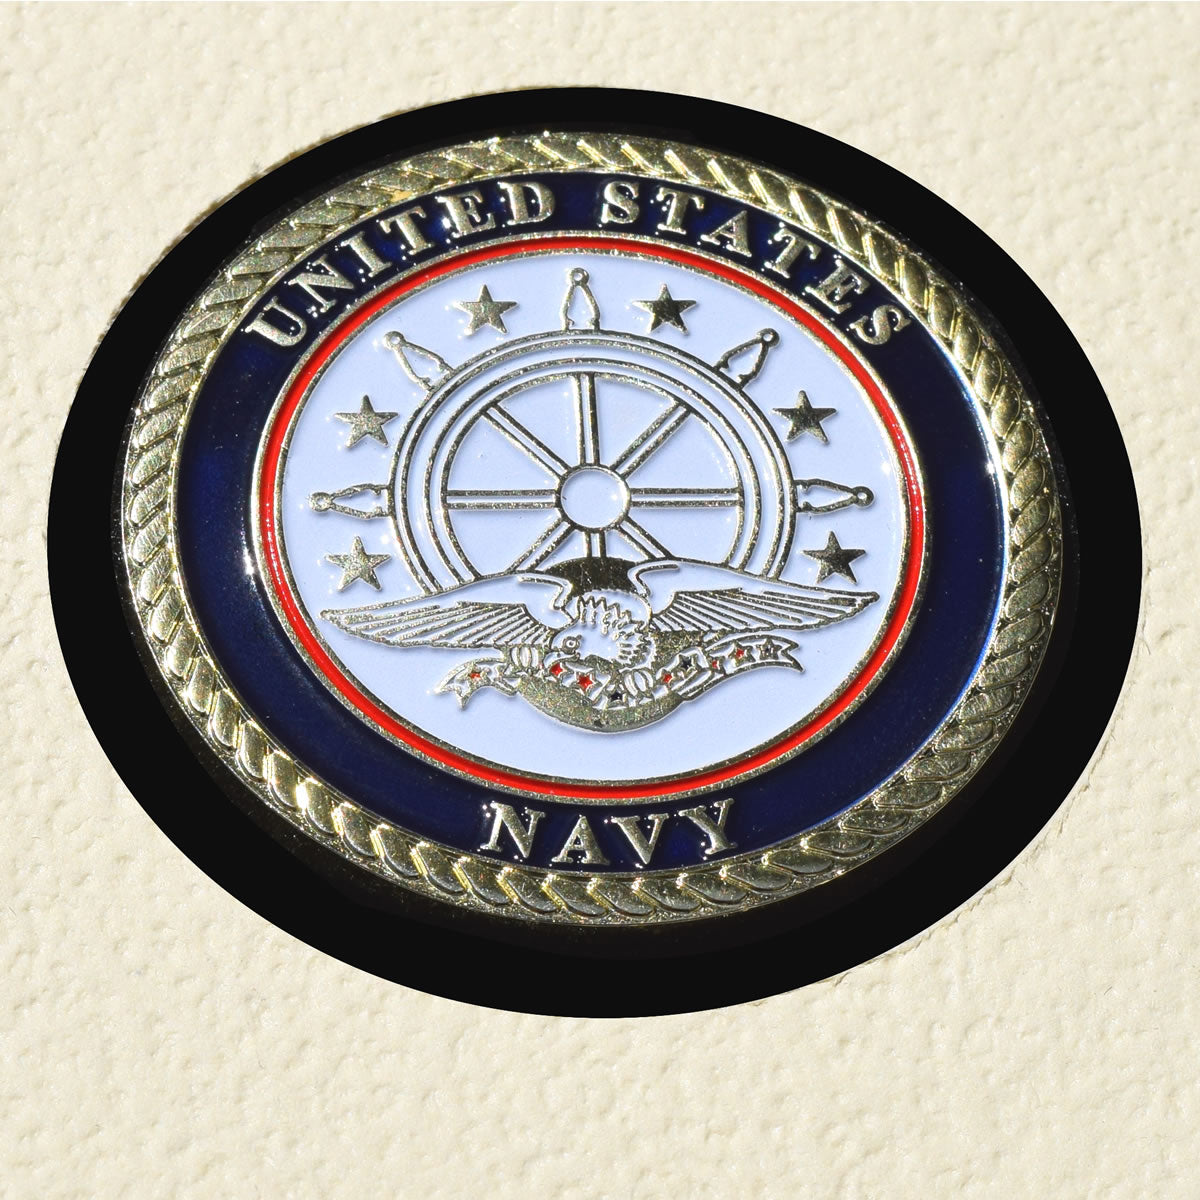 USS MAUMEE T-AO-149 Detailed Coin